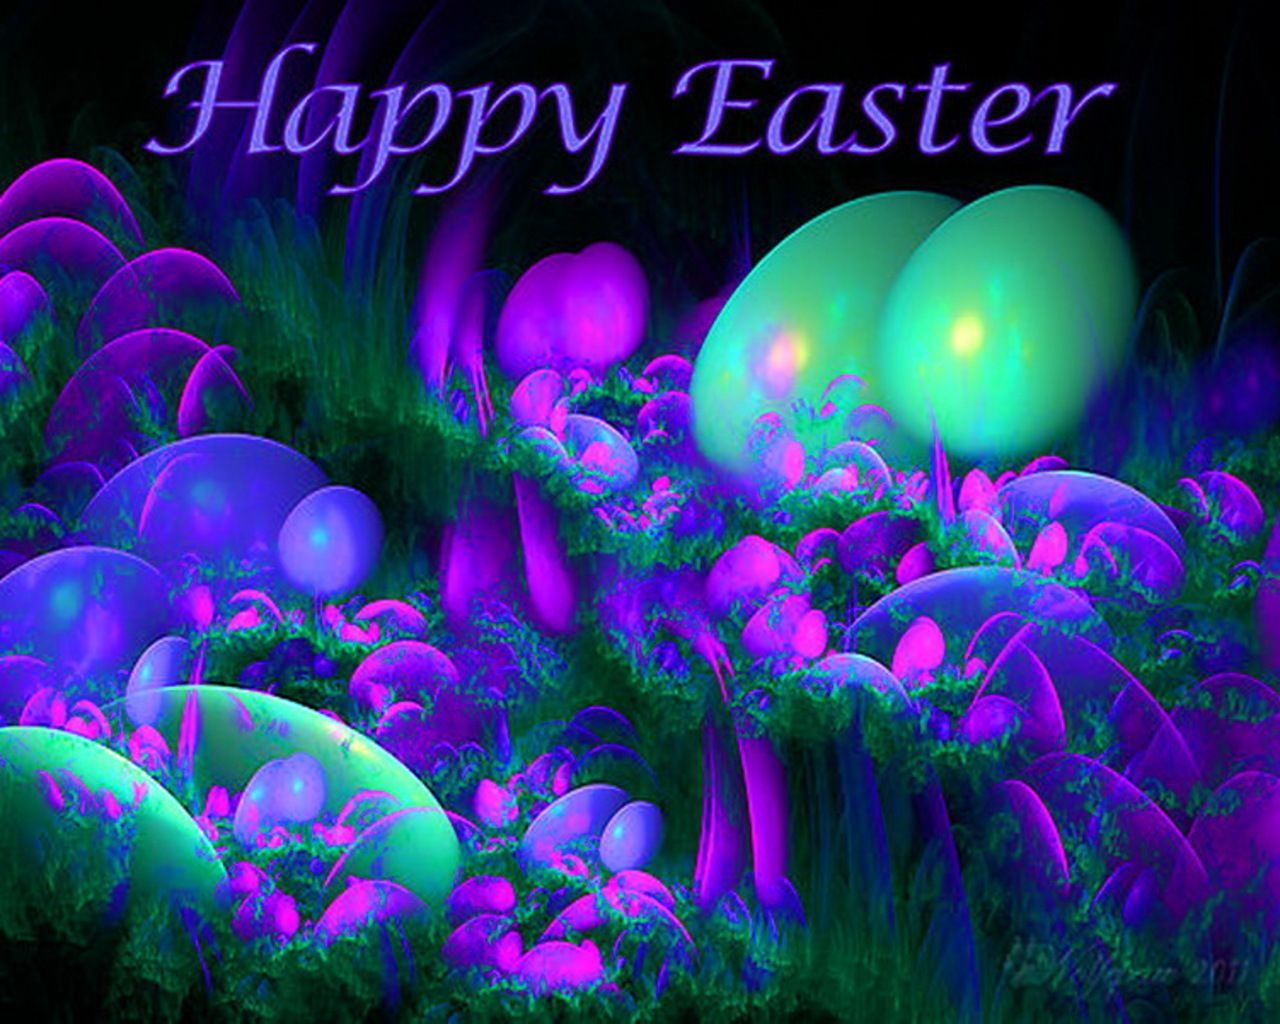 Bright Colors Wallpaper: HAPPY EASTER!. Happy easter wallpaper, Happy easter picture, Easter wallpaper